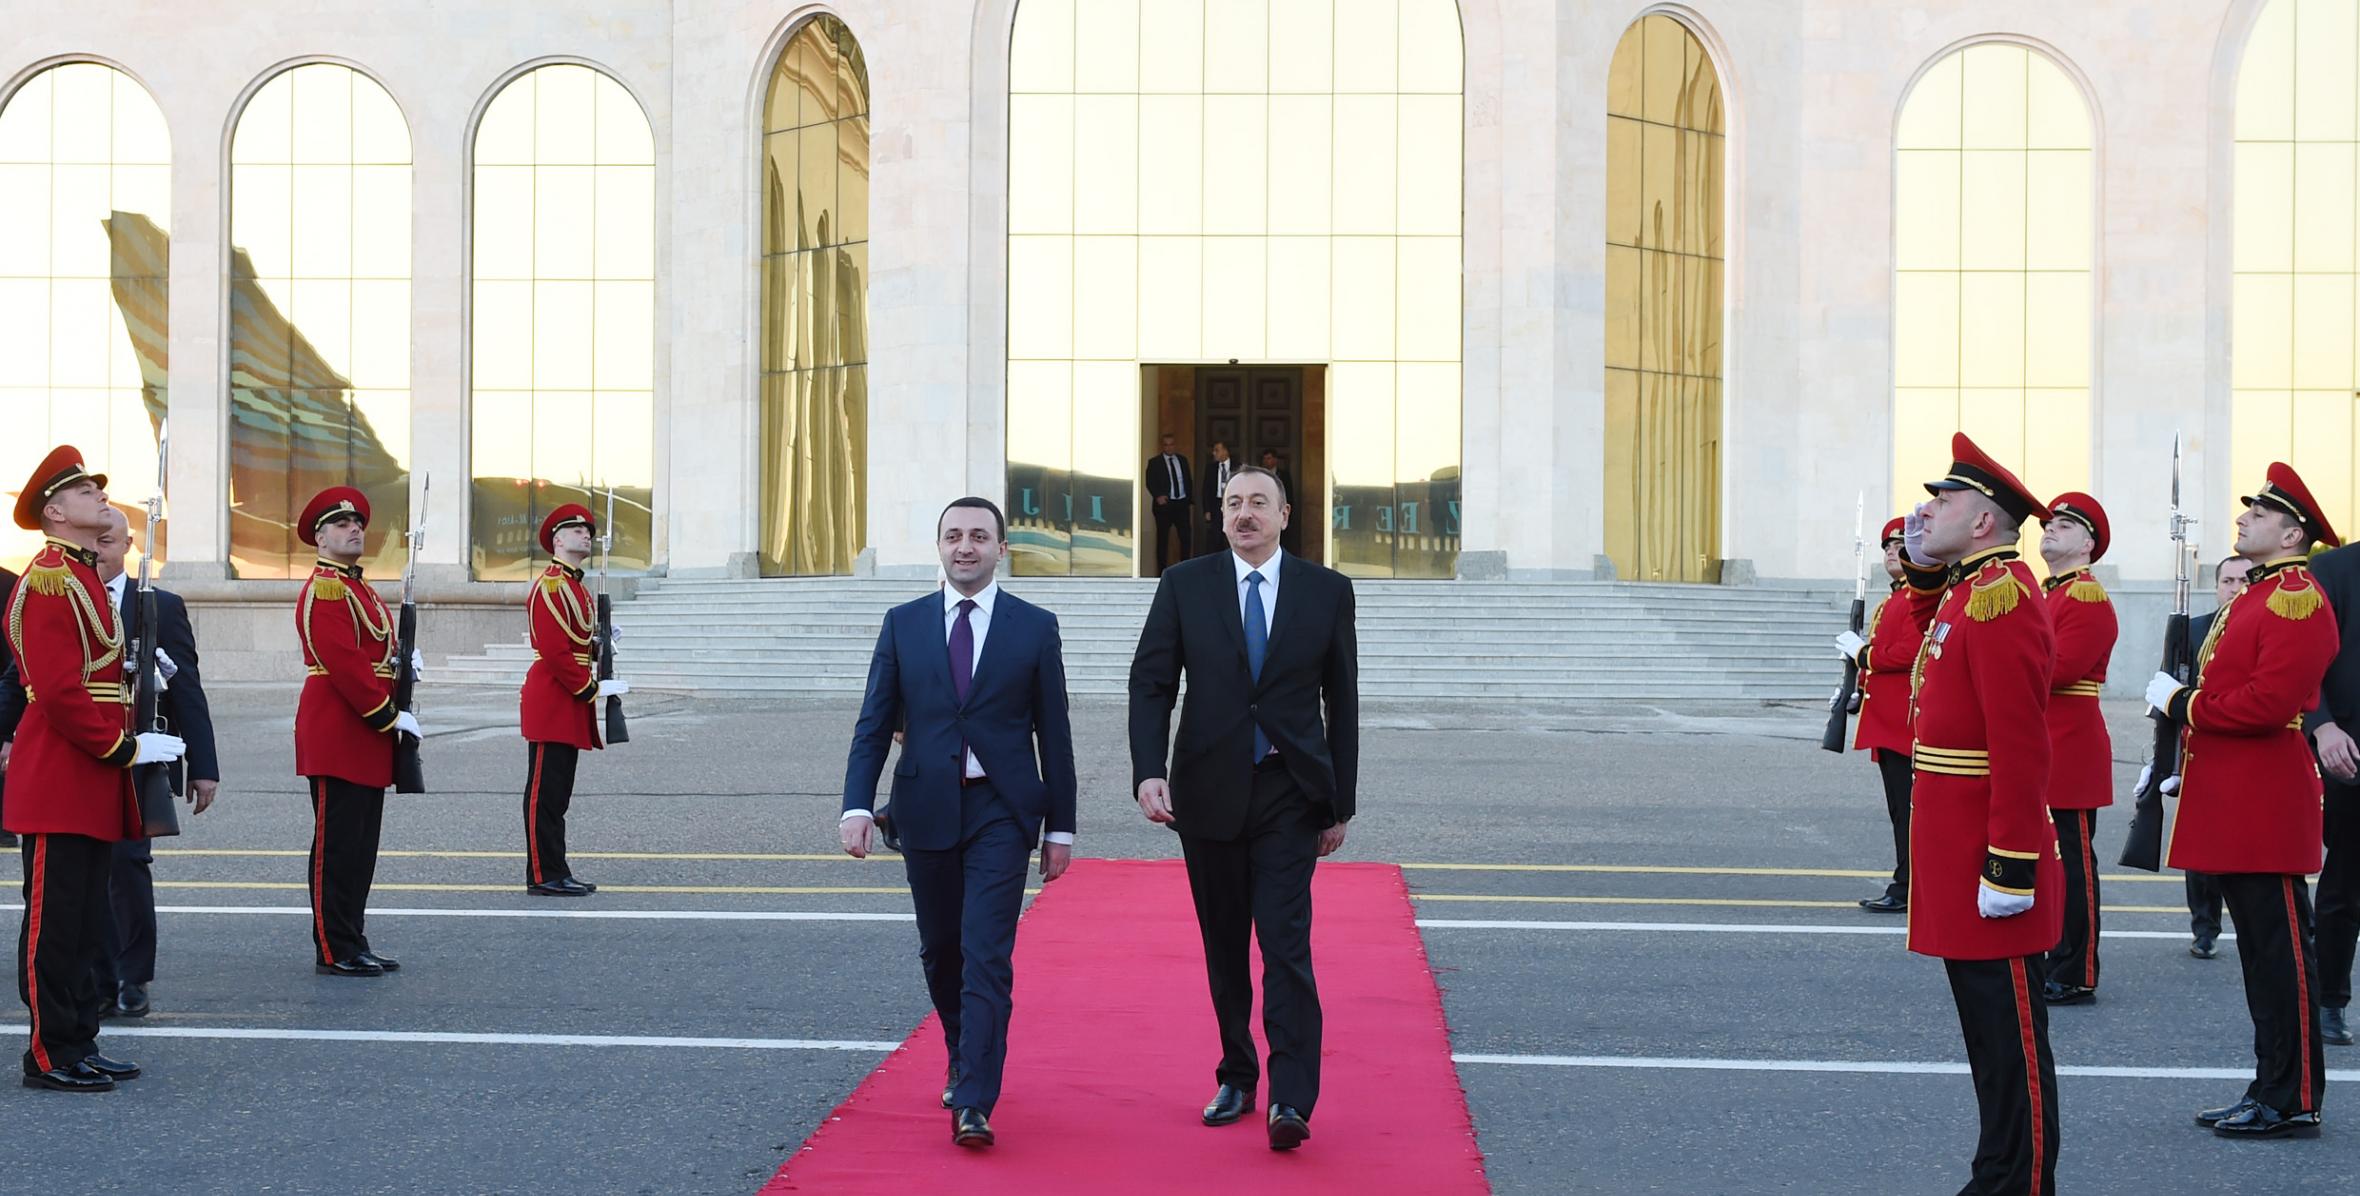 Ilham Aliyev ended his official visit to Georgia